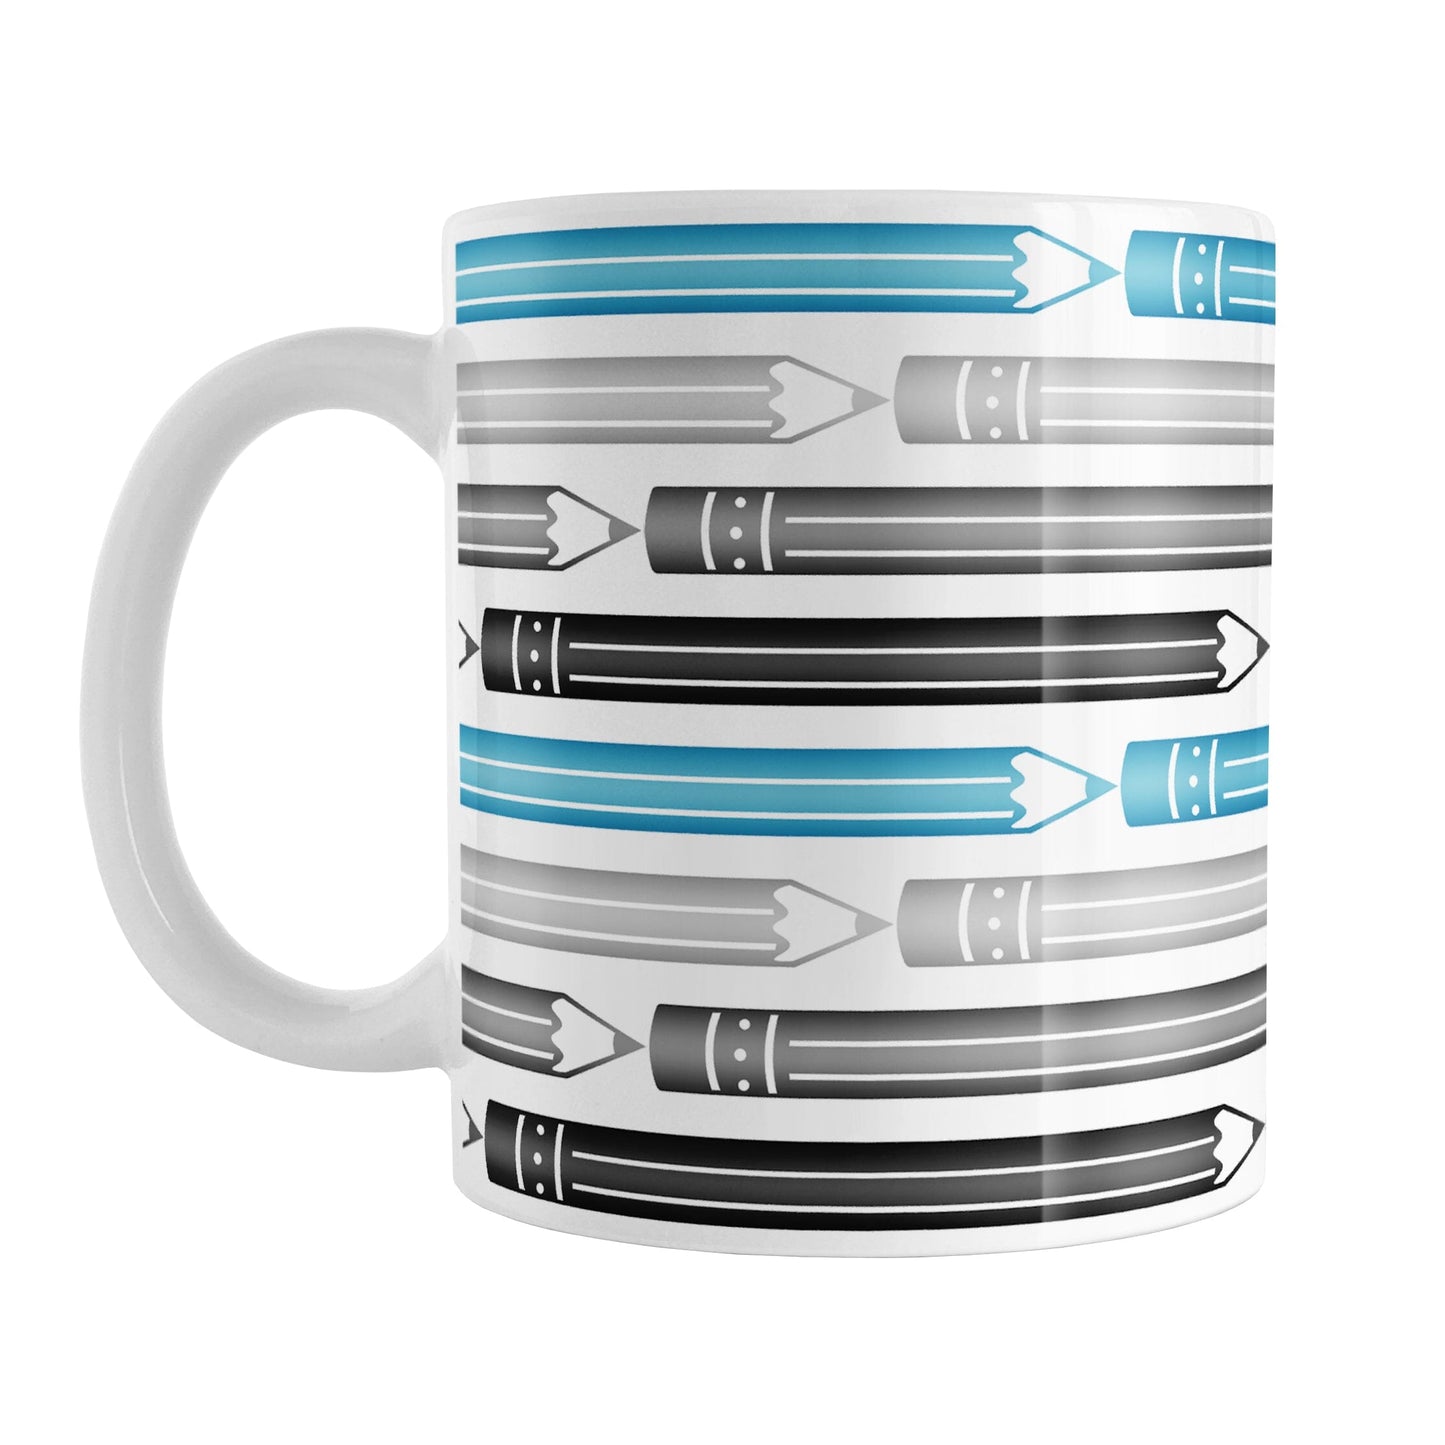 Blue Gray Black Pencils Pattern Mug (11oz) at Amy's Coffee Mugs. A ceramic coffee mug designed with a horizontal pencils in blue, gray, and black, stacked in a pattern that wraps around the mug to the handle.